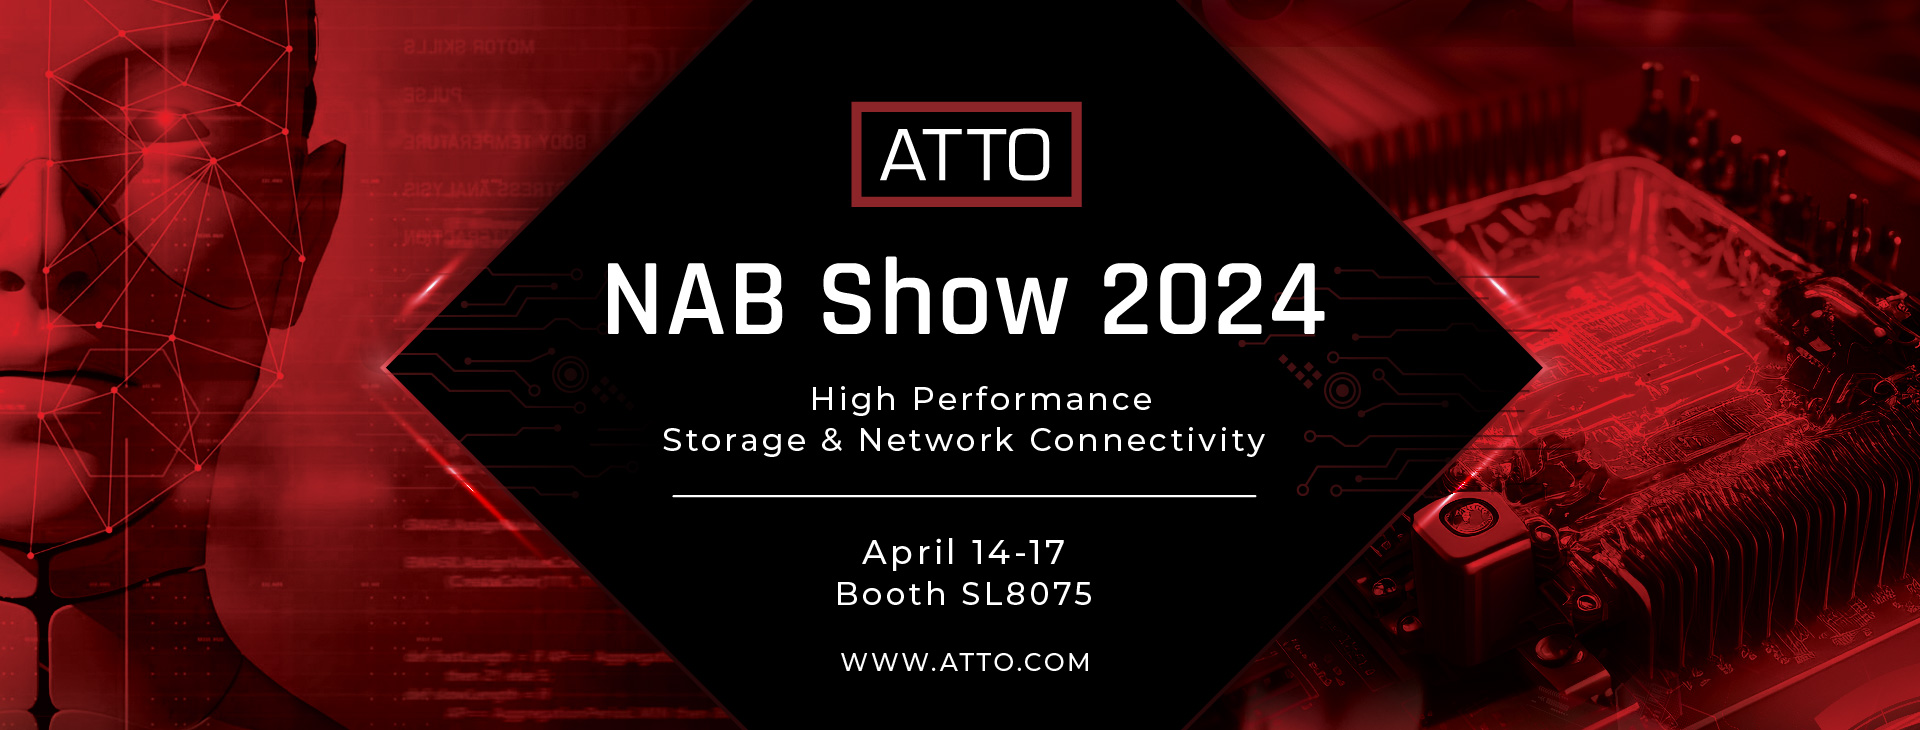 ATTO Technology at NAB Show 2024 - April 14 -Booth SL8075